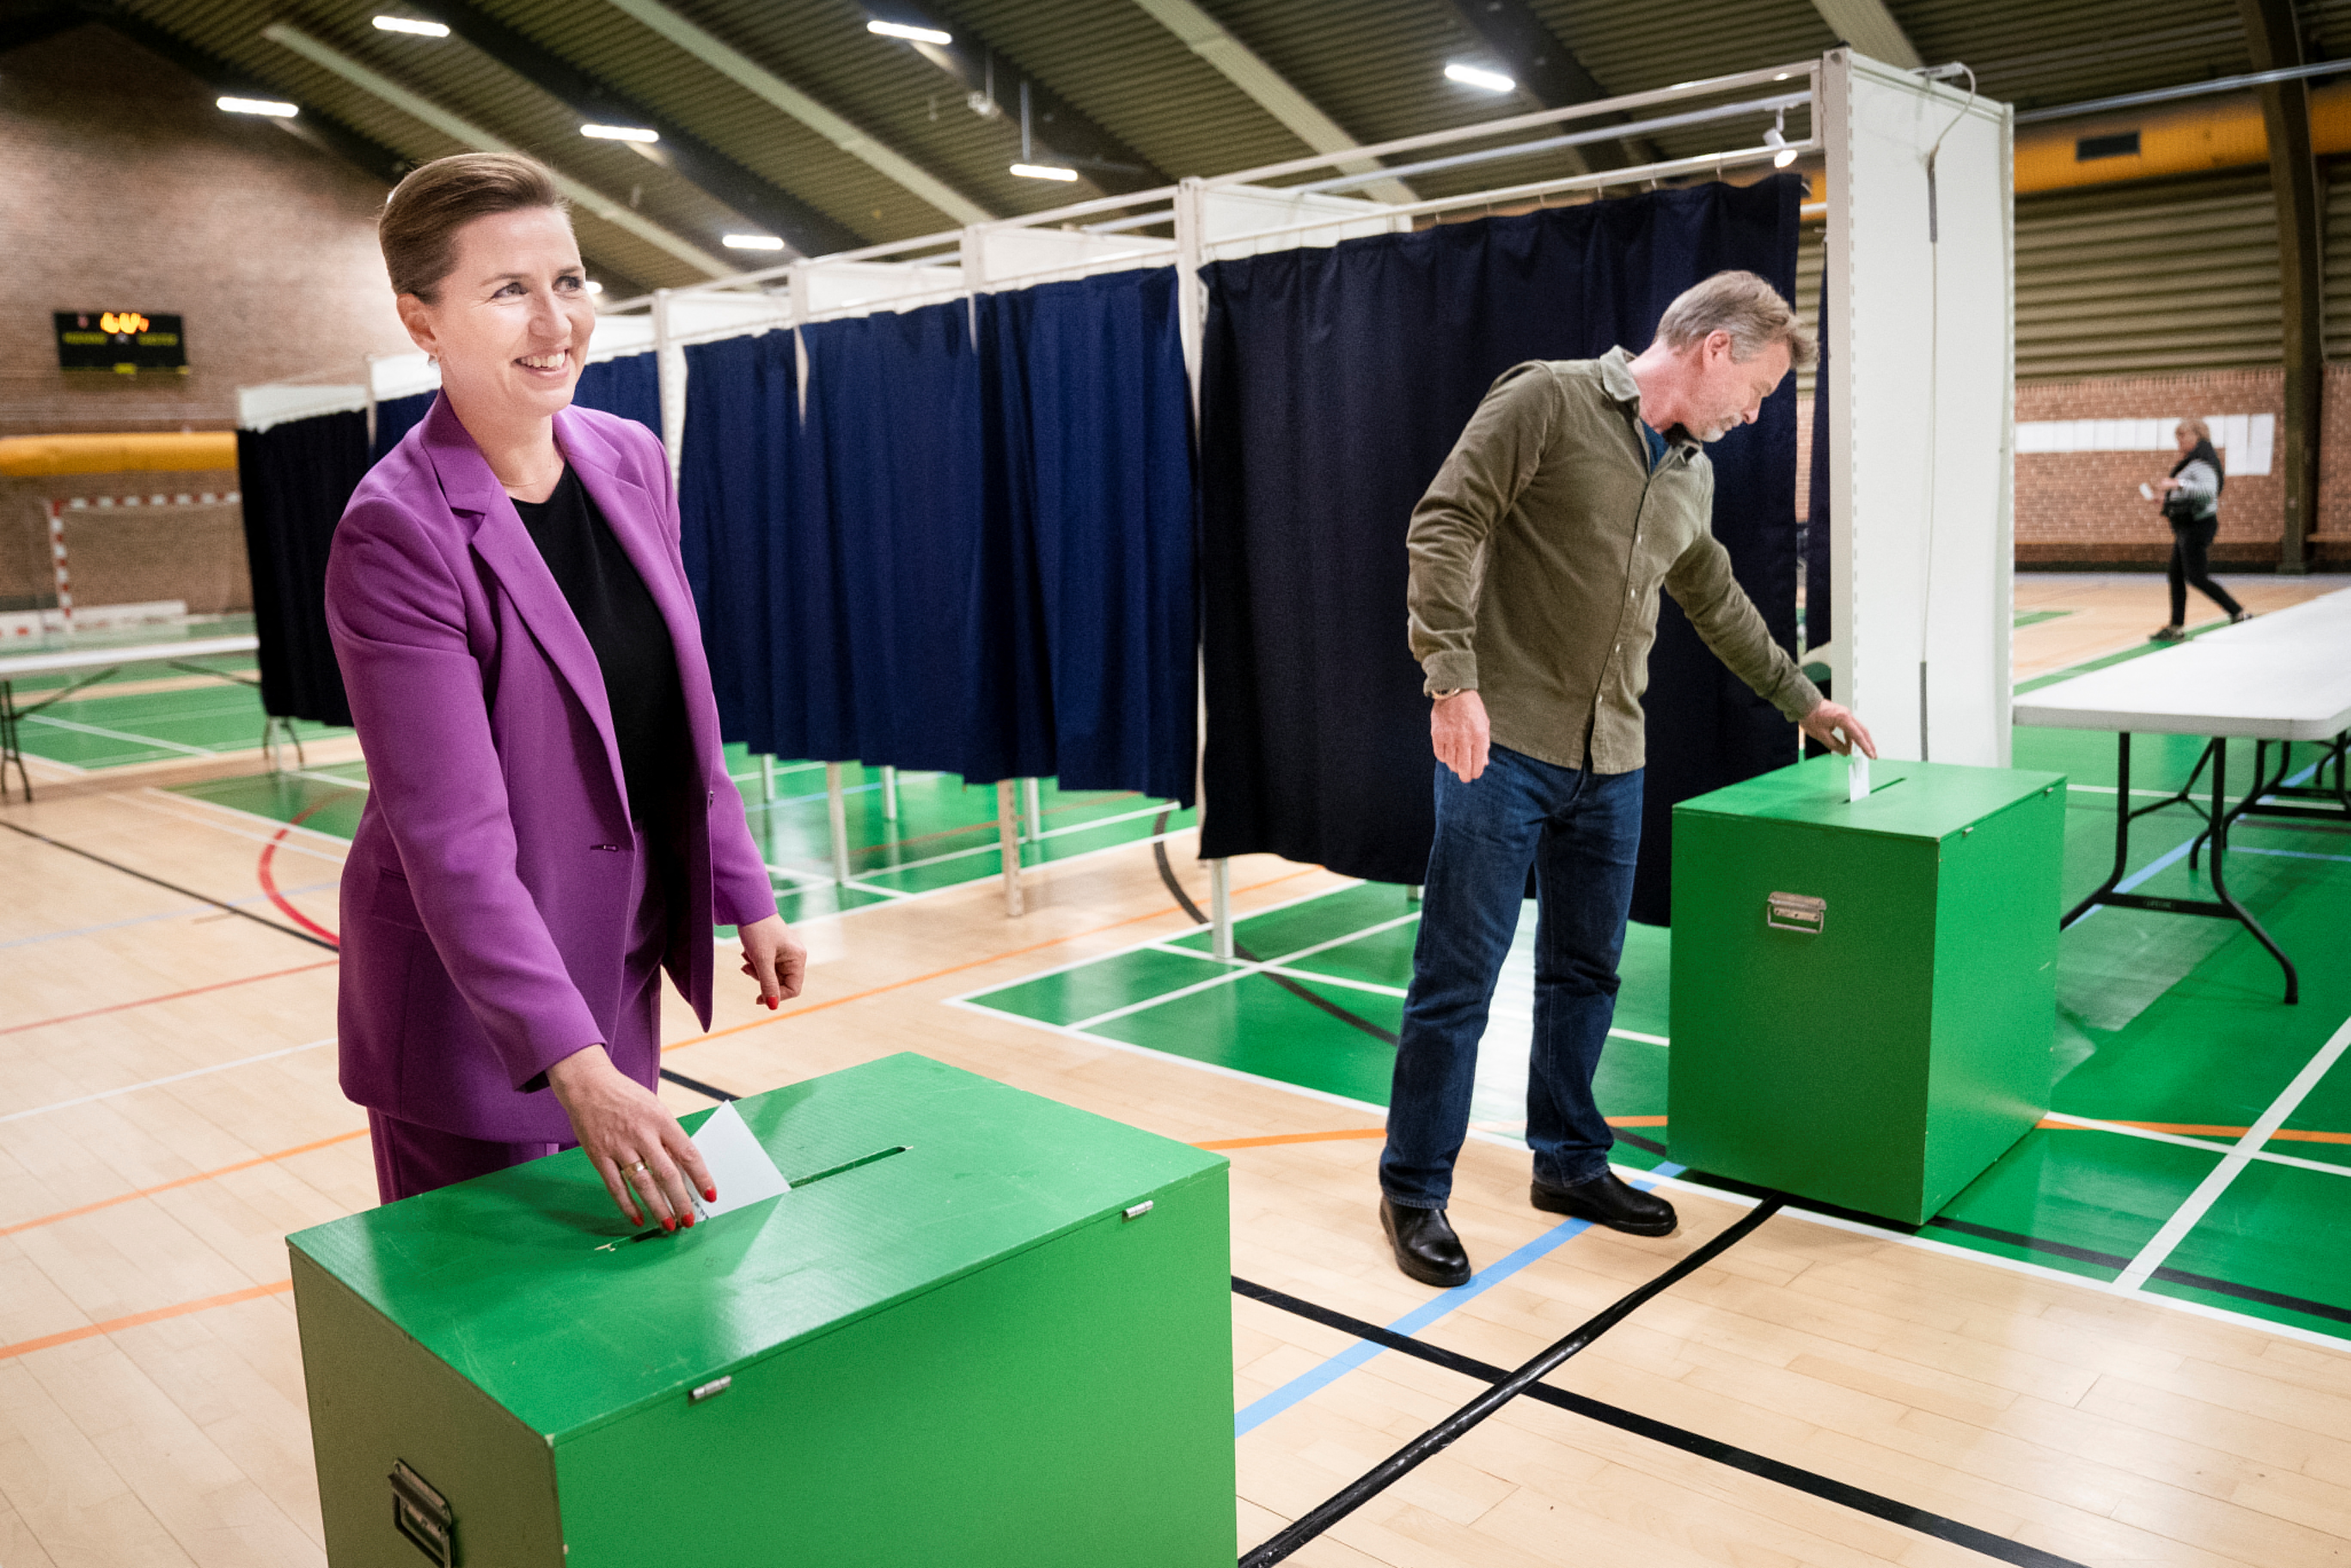 Denmark referendum on the EU-defence opt-out